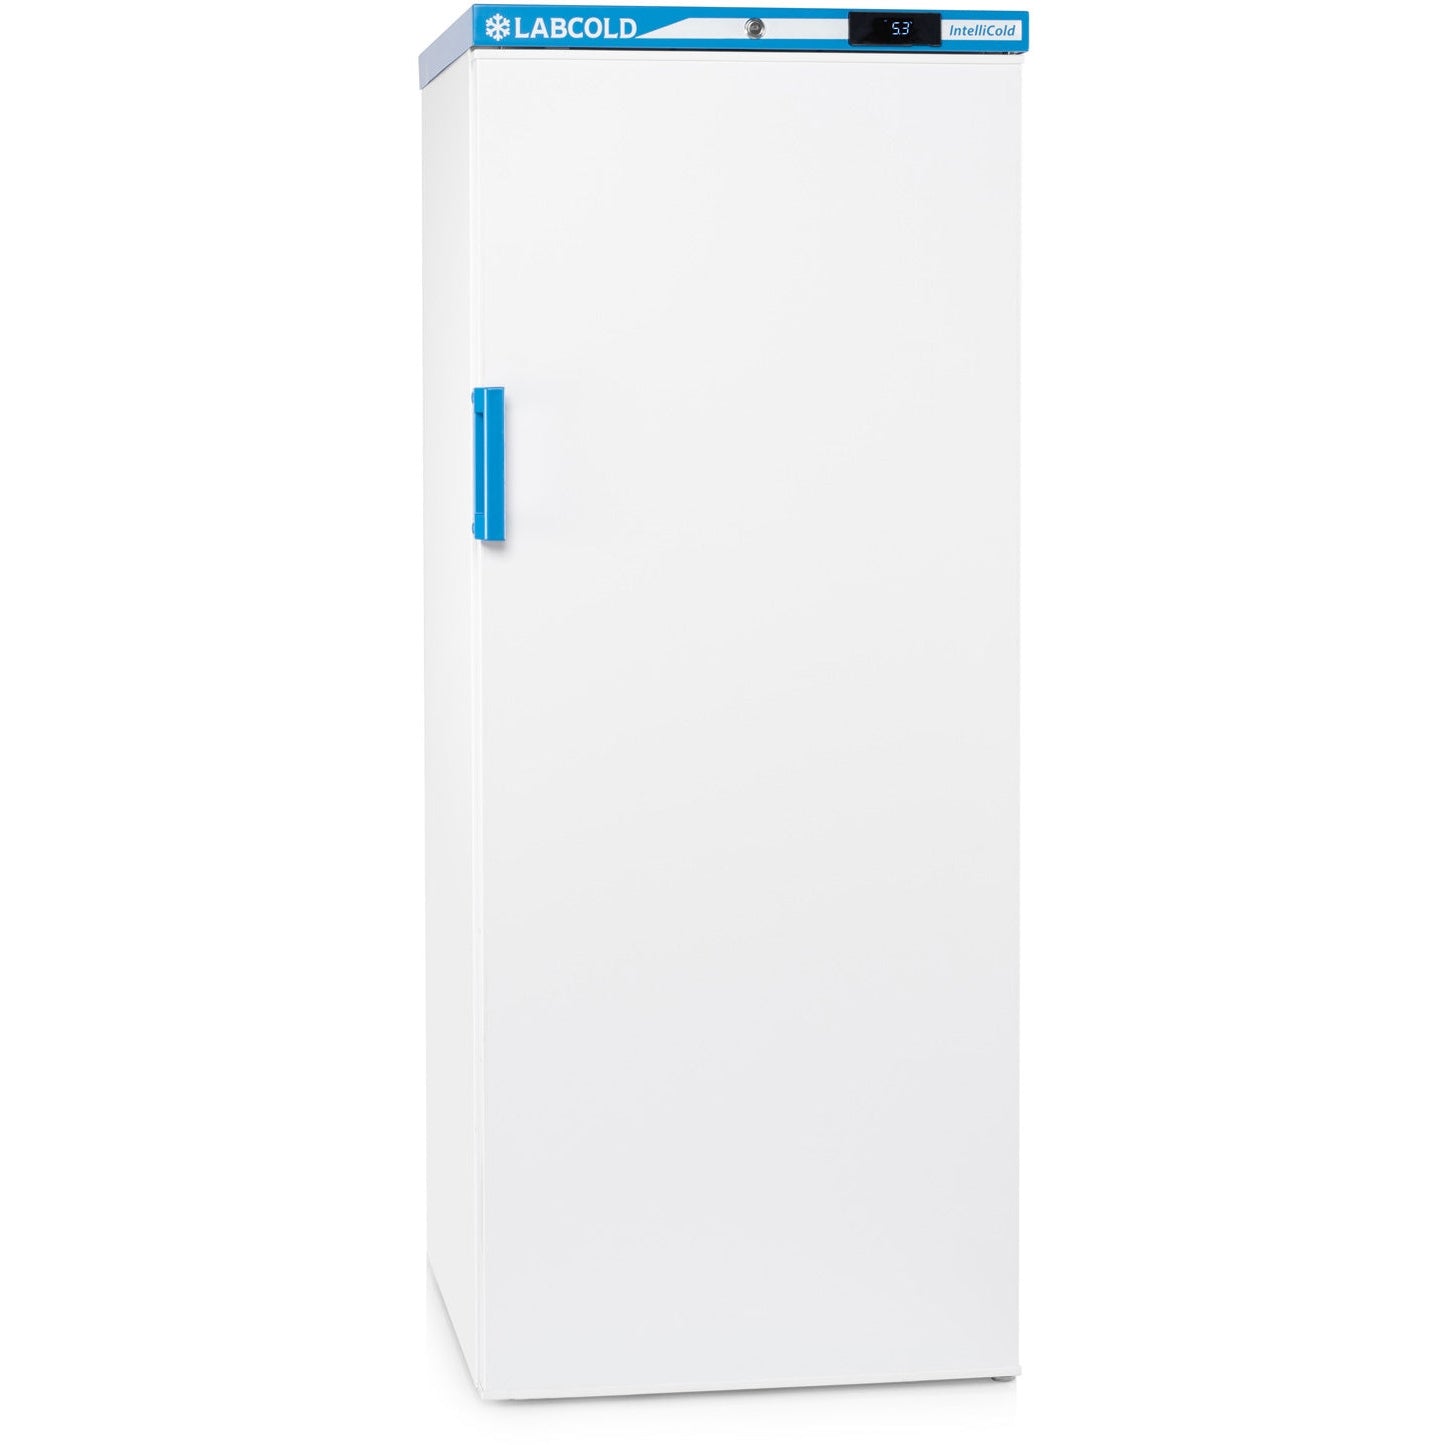 Labcold RLDF1019 Free Standing Pharmacy & Vaccine Refrigerator - 340 Litre - CLEARANCE